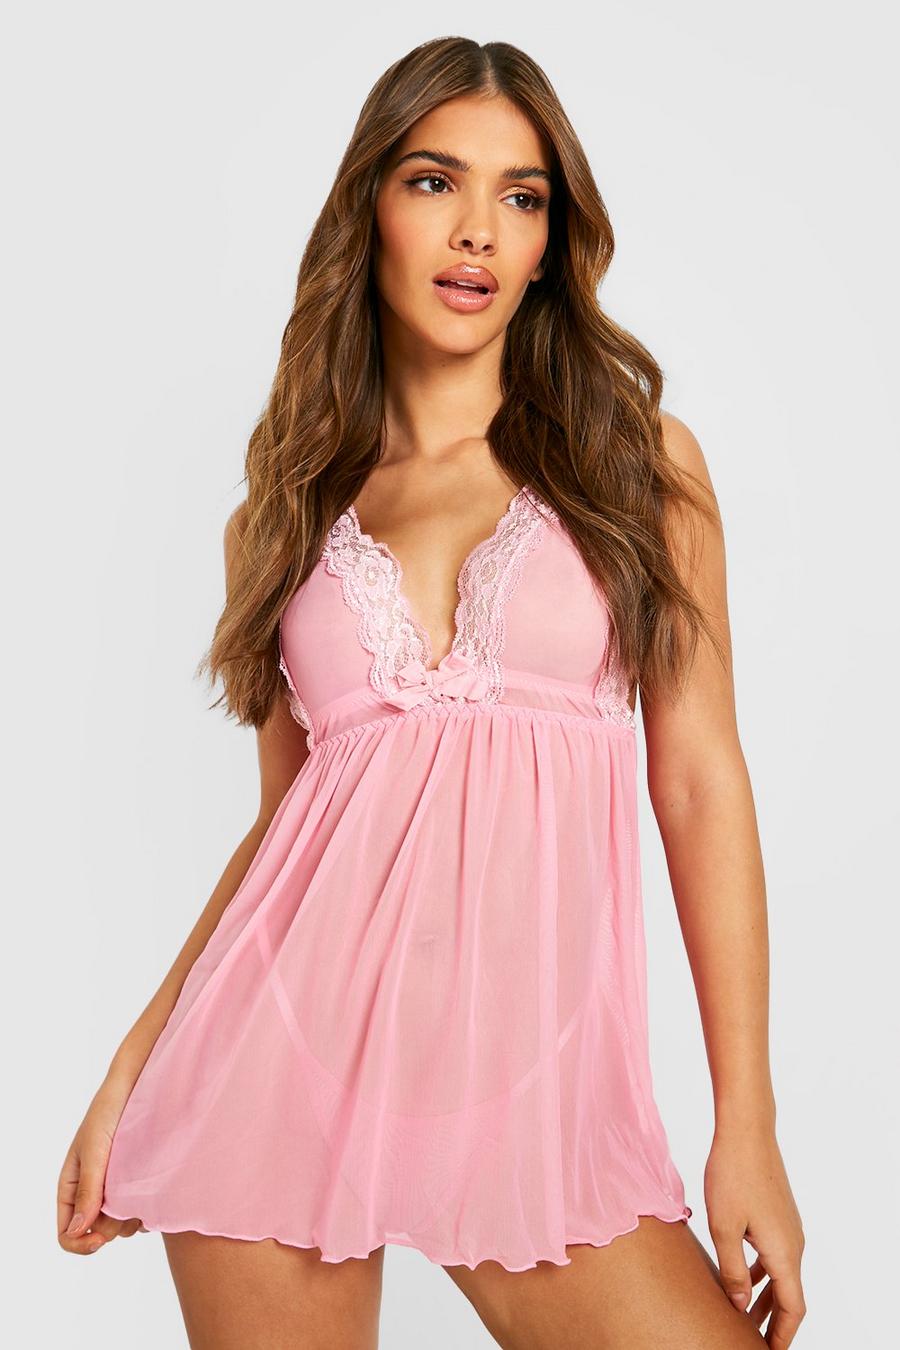 Blush pink Mesh and Lace Babydoll and String Set